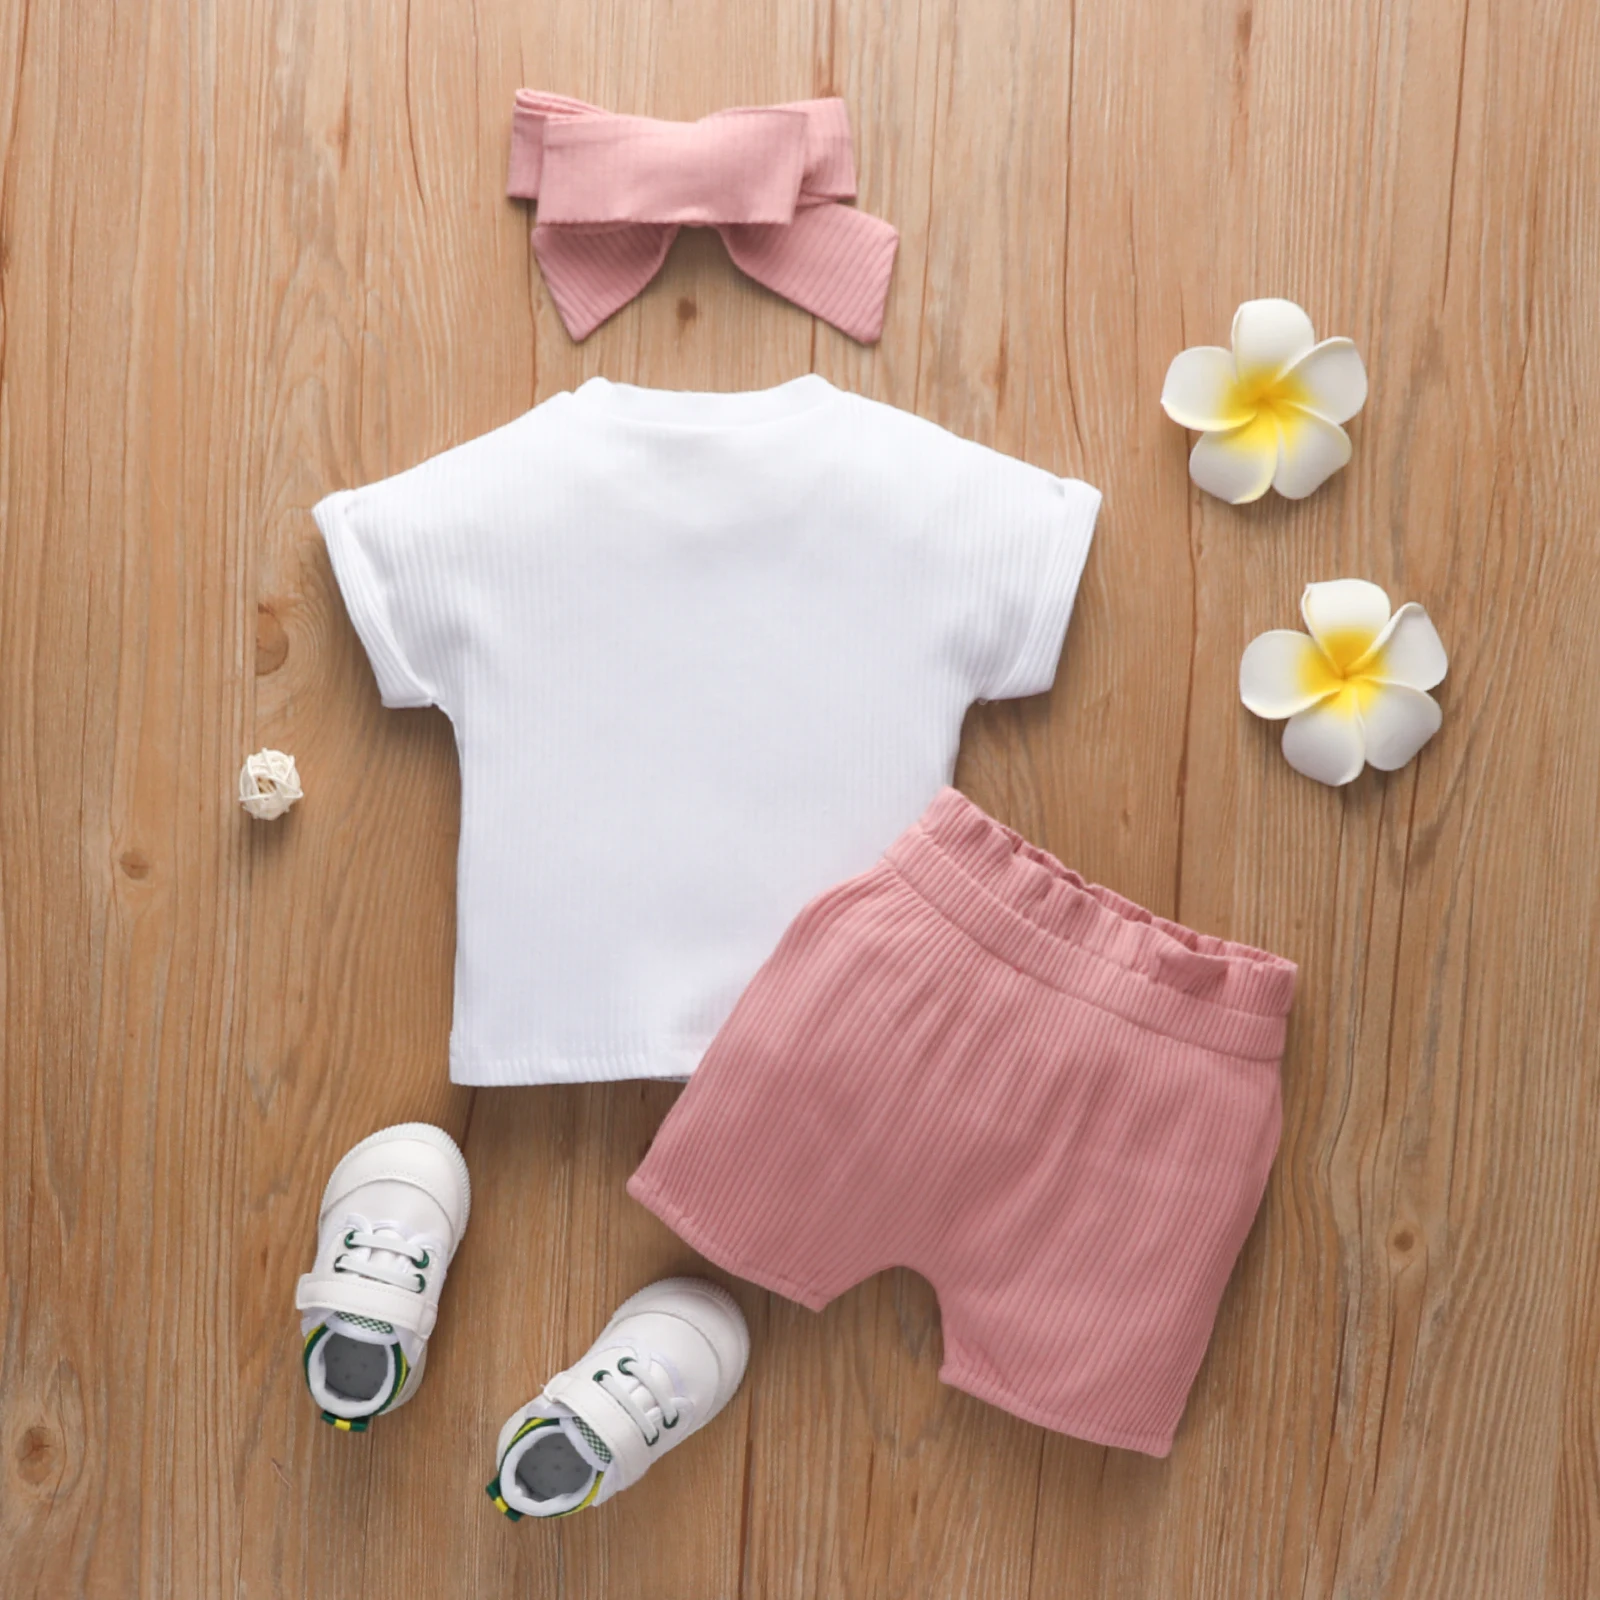 Summer Little Boys Girls Outfits Fashion Toddlers Rainbow Short Sleeve Tops+Elastic Shorts Kids Sister Brother Clothes Set Clothing Sets luxury